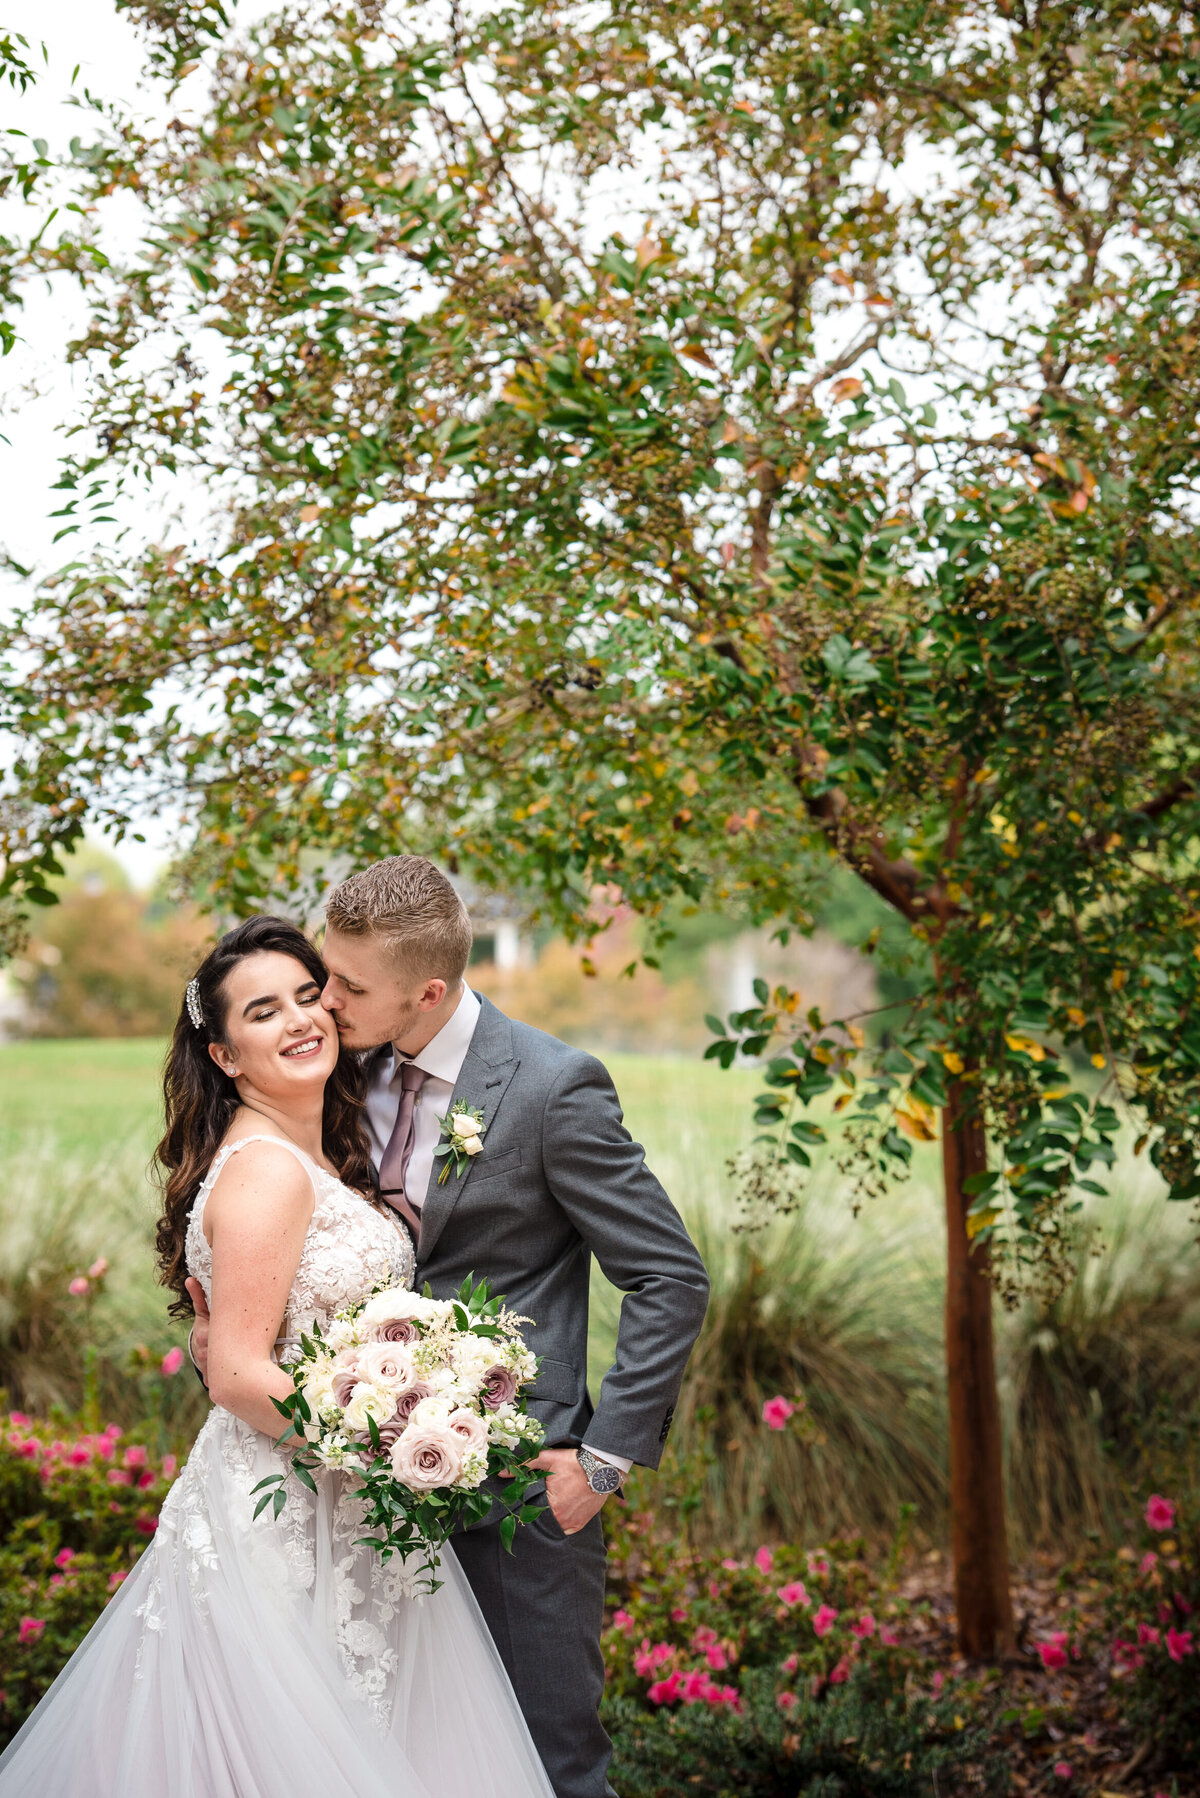 Russian groom kissing bride's cheek outside in the garden of at the Ballantyne Hotel by Charlotte wedding photographer DeLong Photography